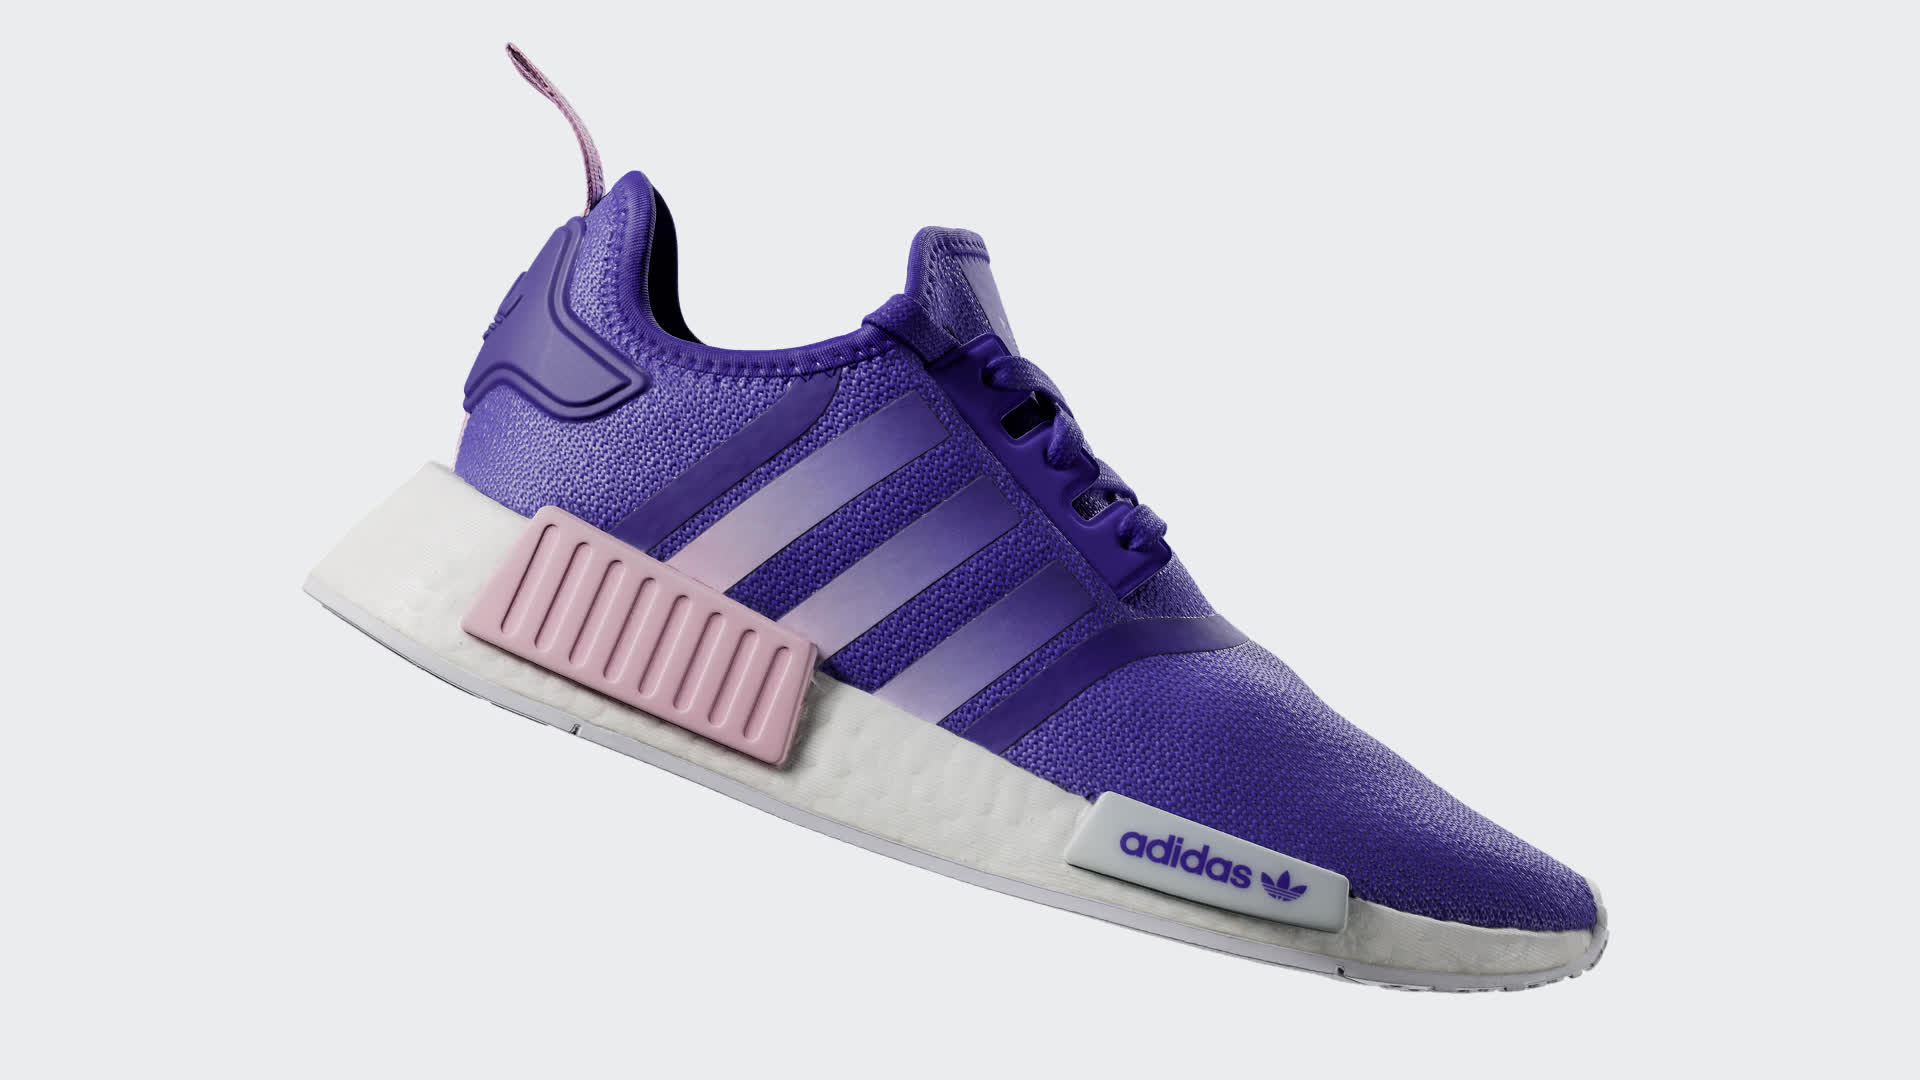 adidas NMD R1 Active Purple Spotted (Women's)